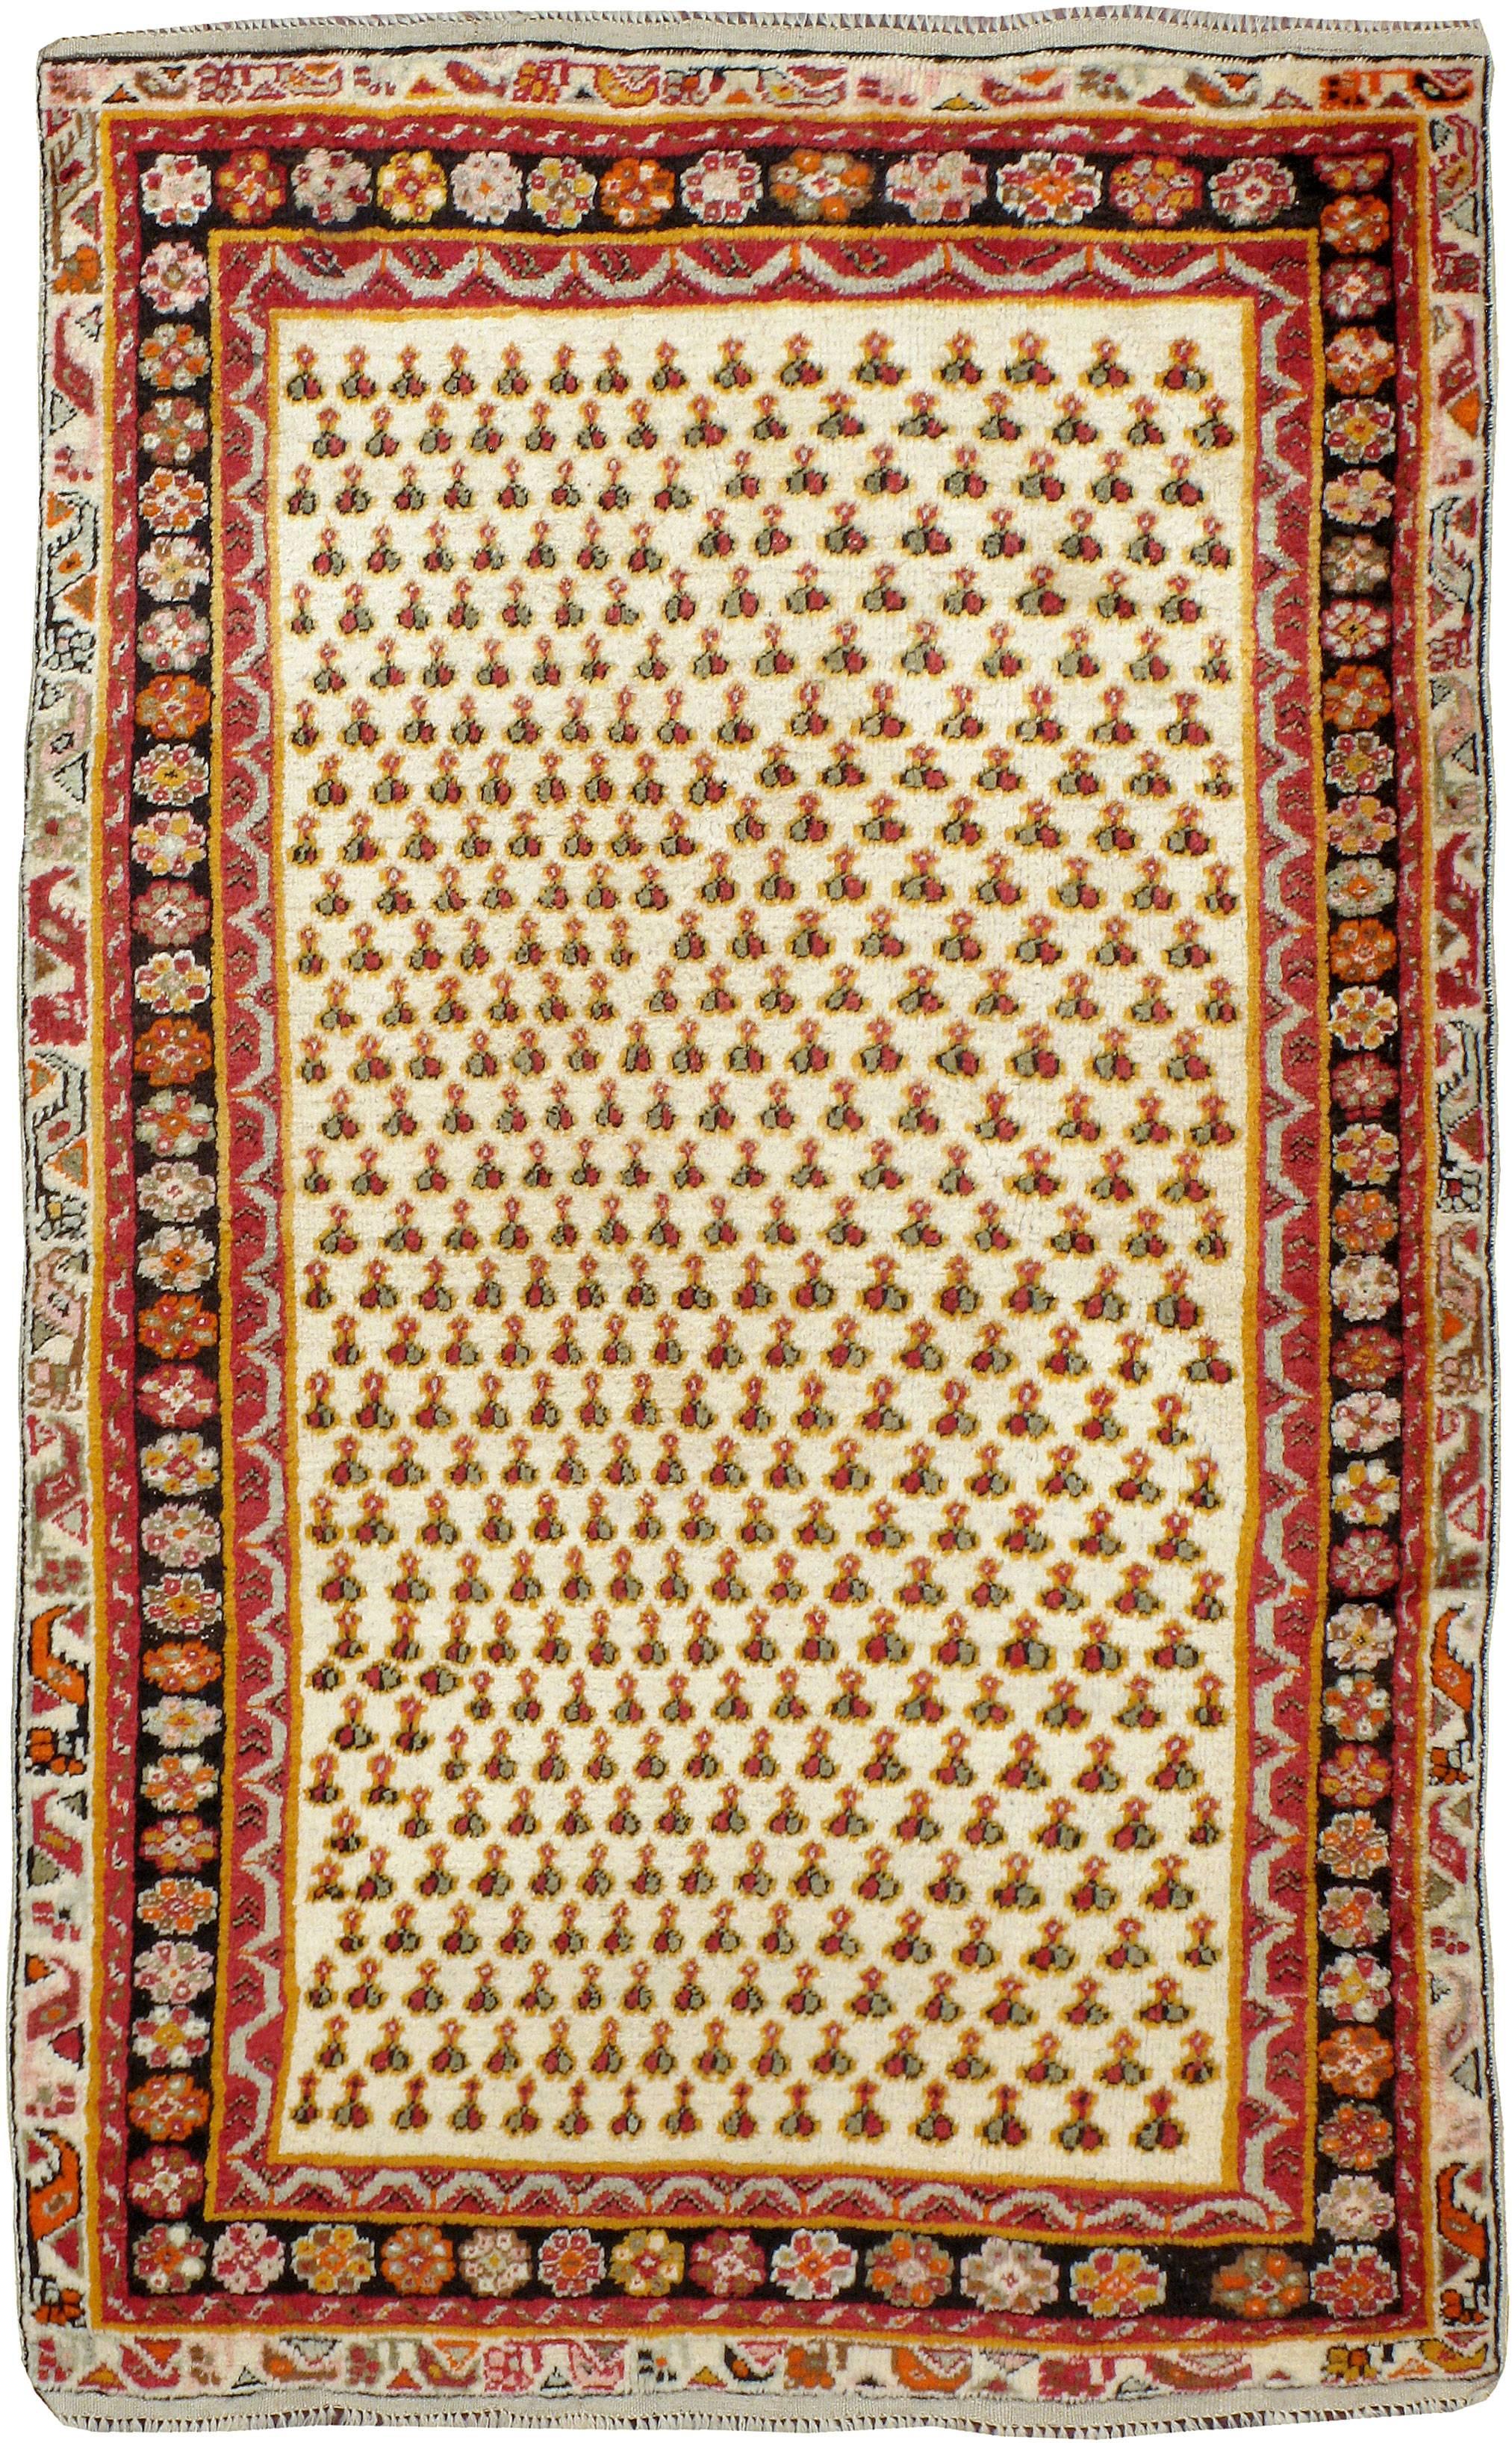 An antique Turkish Ghiordes (also spelled Ghourdes) carpet from the first quarter of the 20th century.